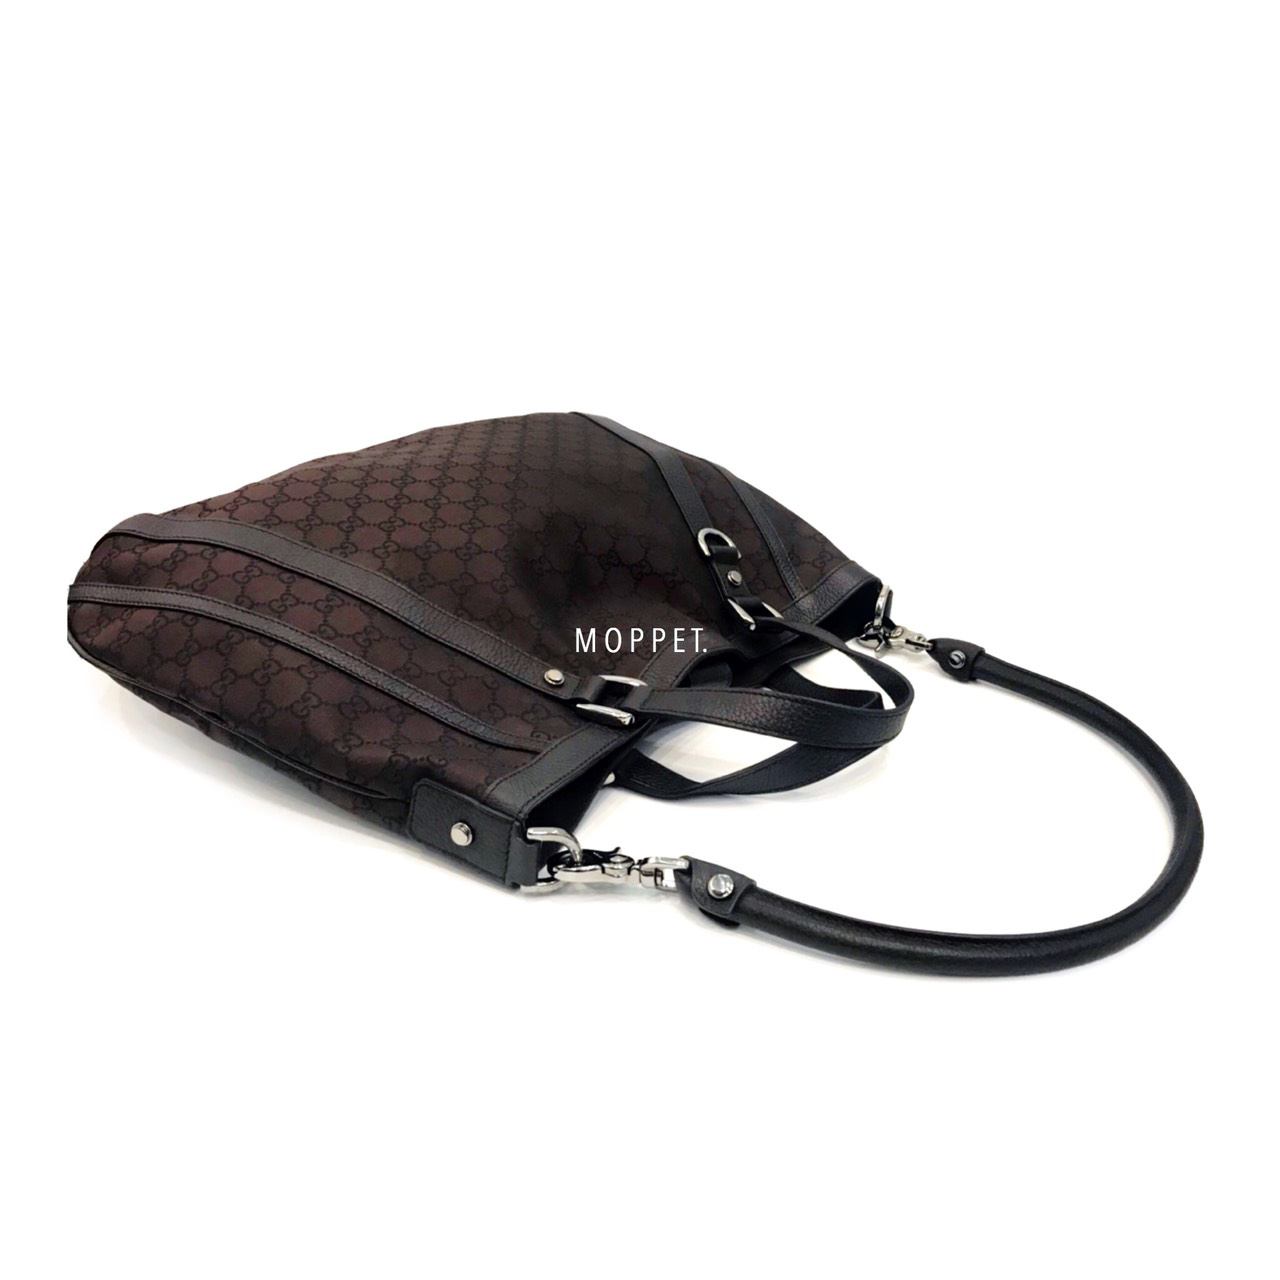 Used Gucci Hobo bag in Signature Brown SHW